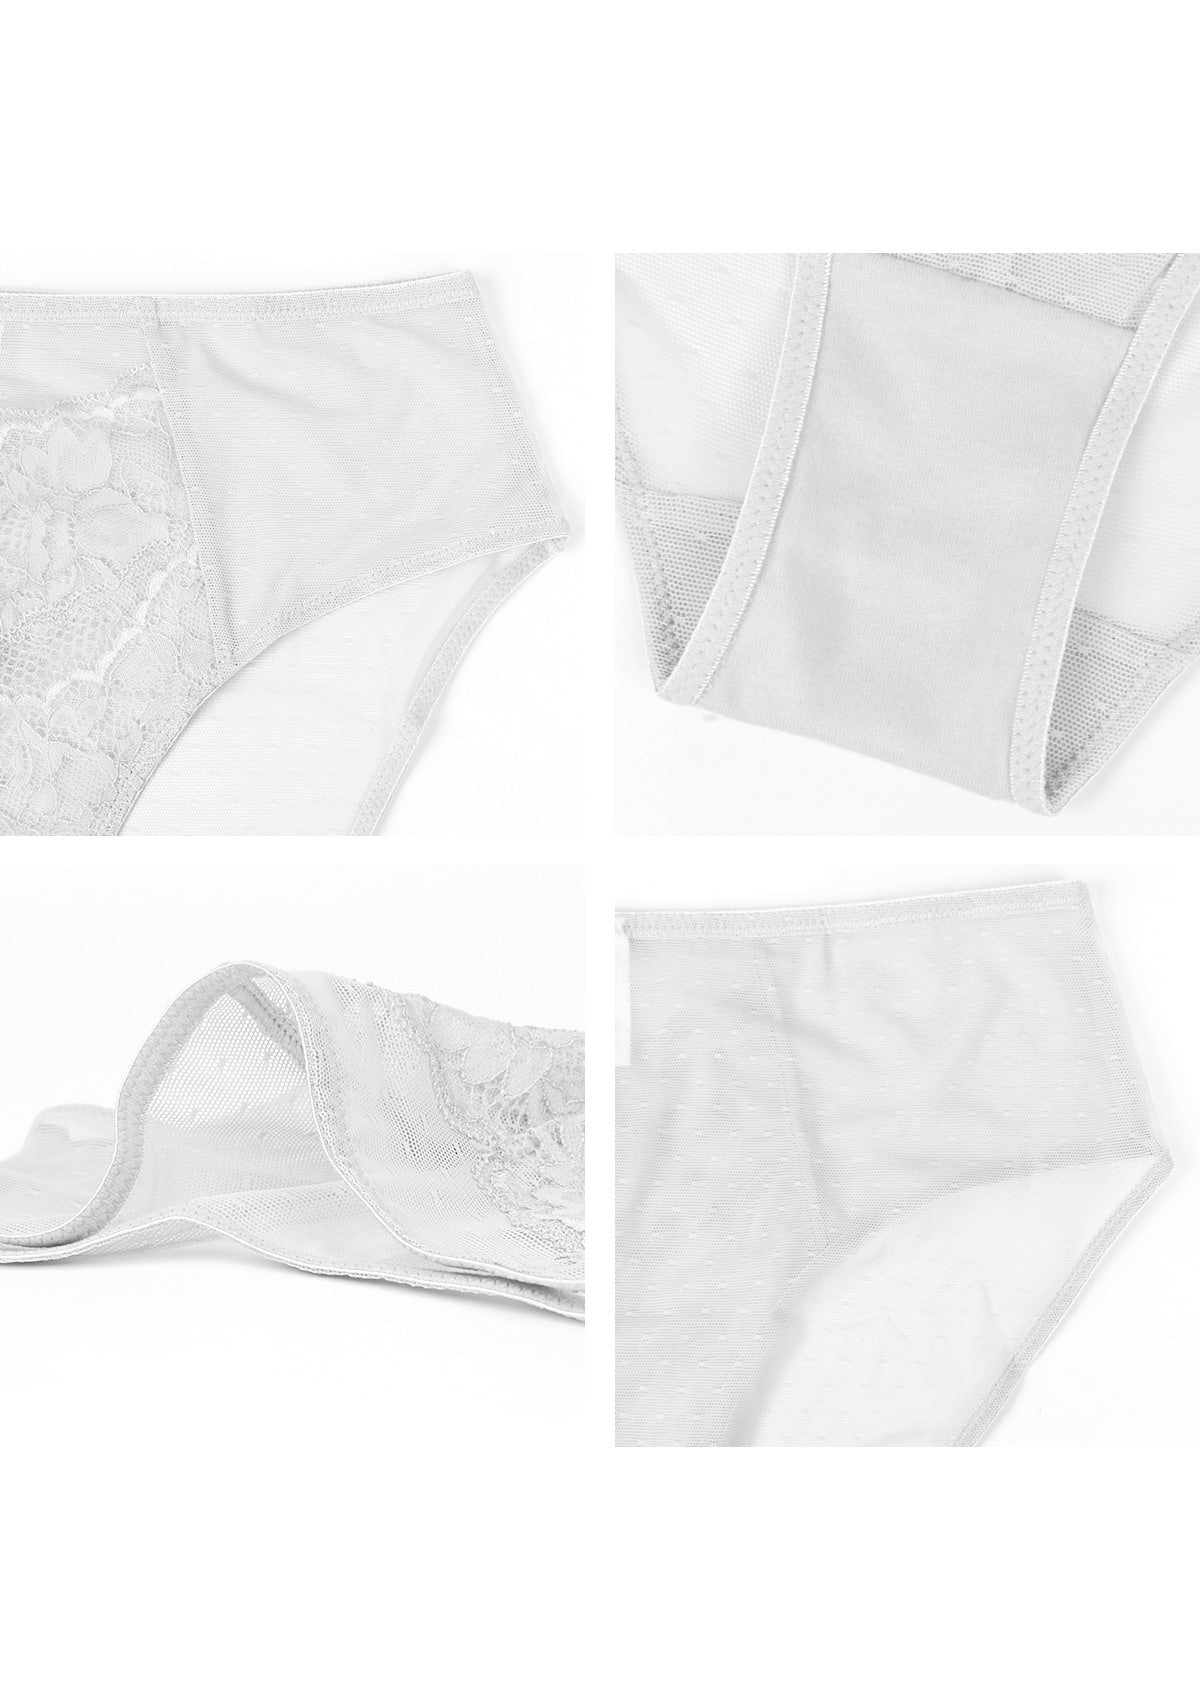 HSIA Enchante High-Rise Floral Lacy Panty-Comfort In Style - XXL / White